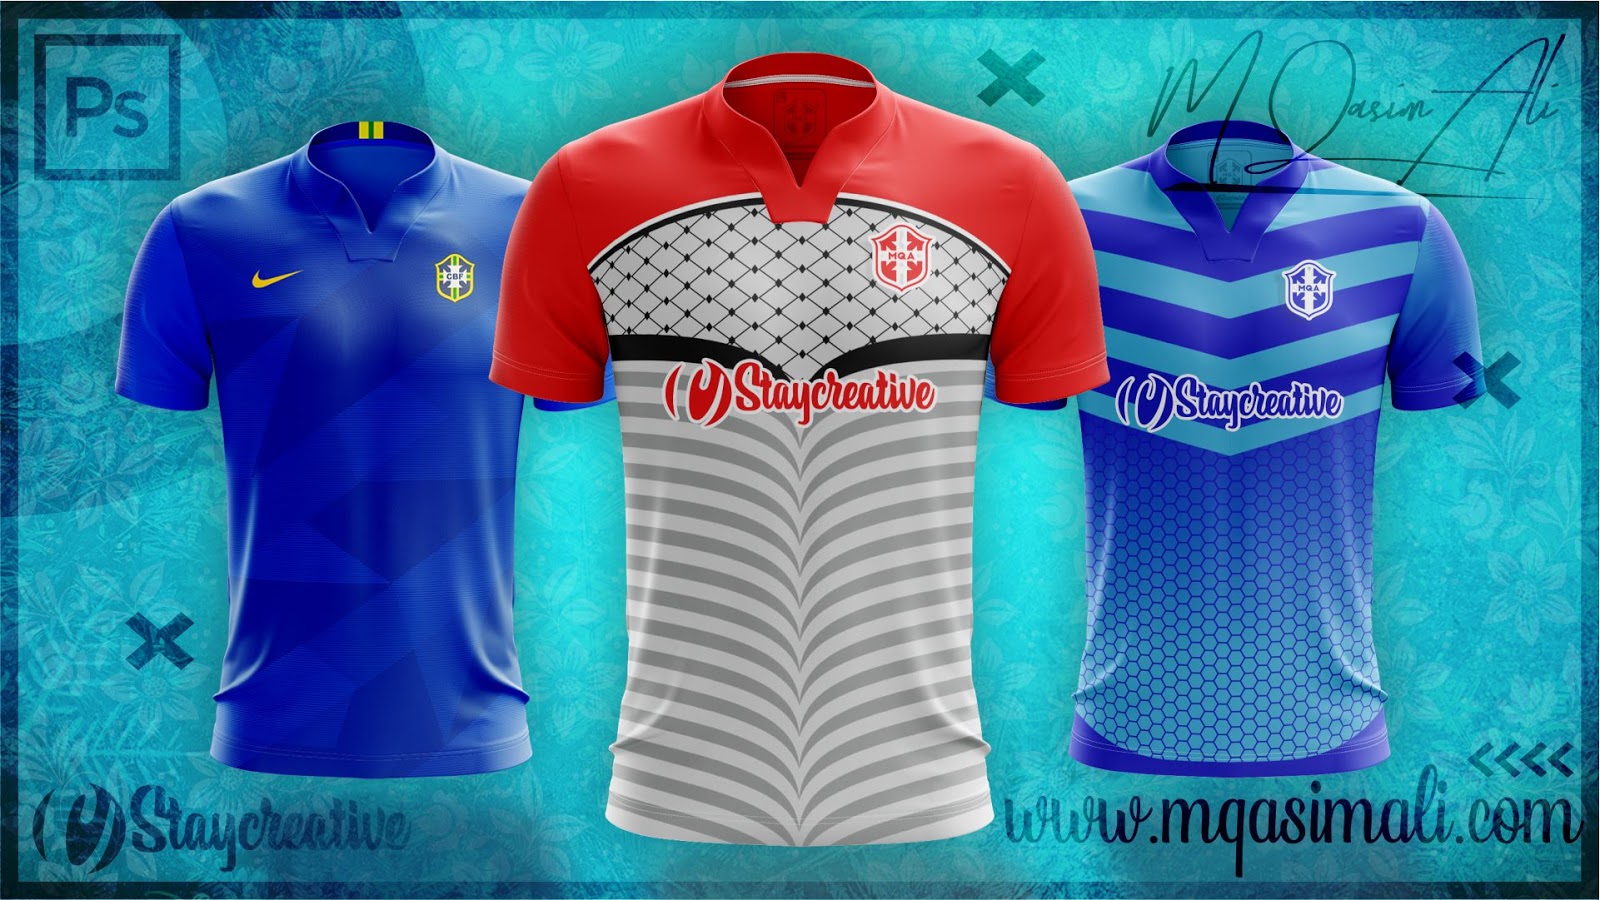 Download Photoshop Sports Templates_Creative Soccer/Football Jersey Design in Photoshop by M Qasim Ali ...